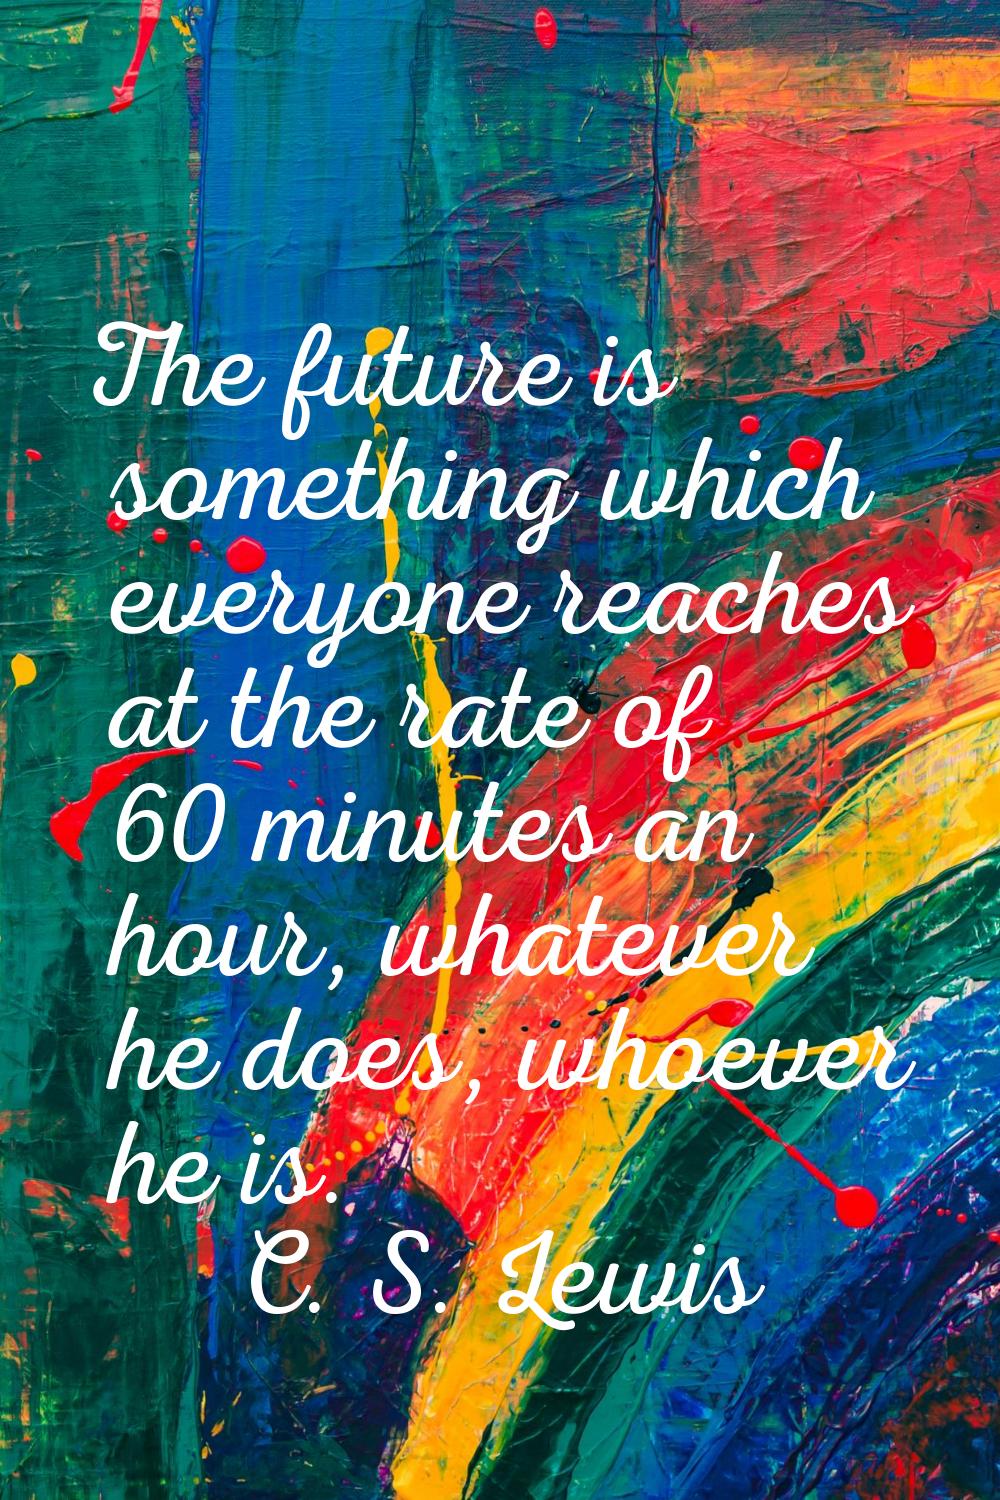 The future is something which everyone reaches at the rate of 60 minutes an hour, whatever he does,